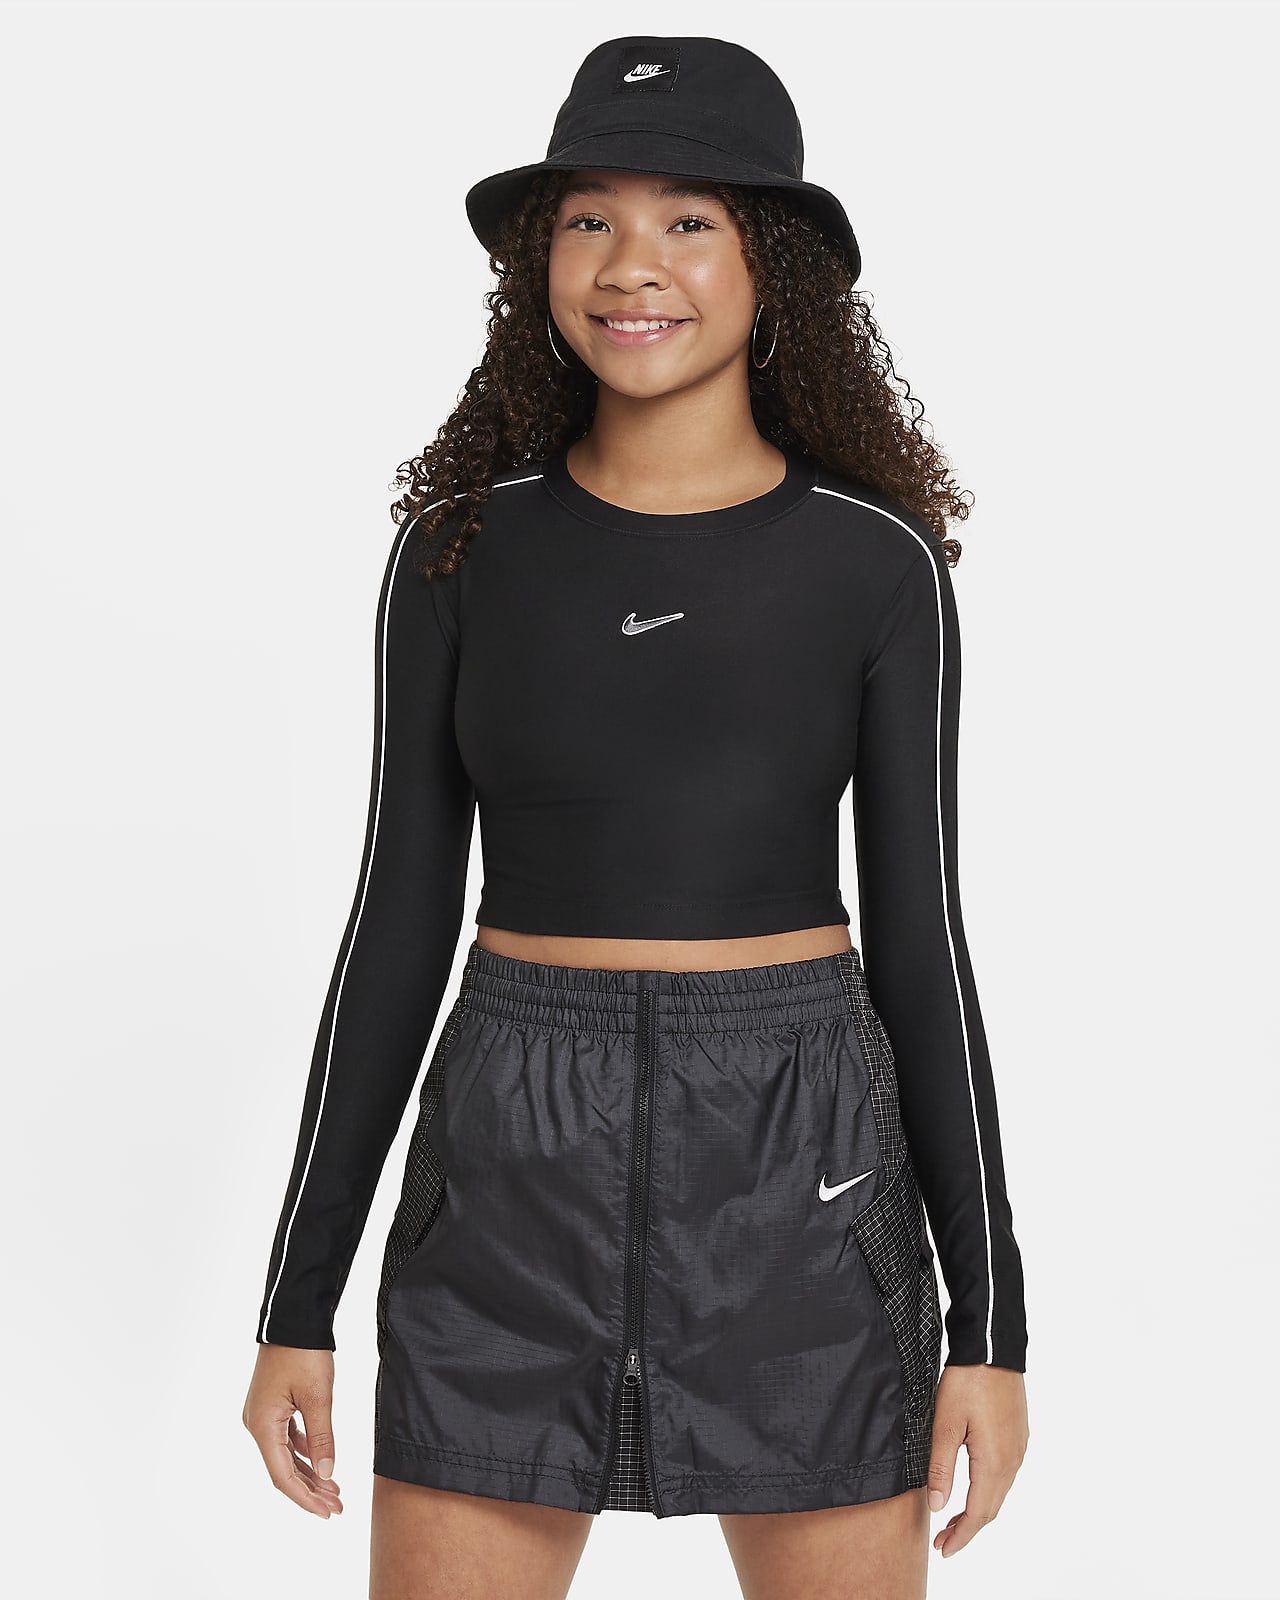 https://static.nike.com/a/images/t_PDP_1280_v1/f_auto,q_auto:eco/c1ea0faa-df9c-43fe-b892-c83049ecbee5/sportswear-older-long-sleeve-cropped-top-NF5xD0.png